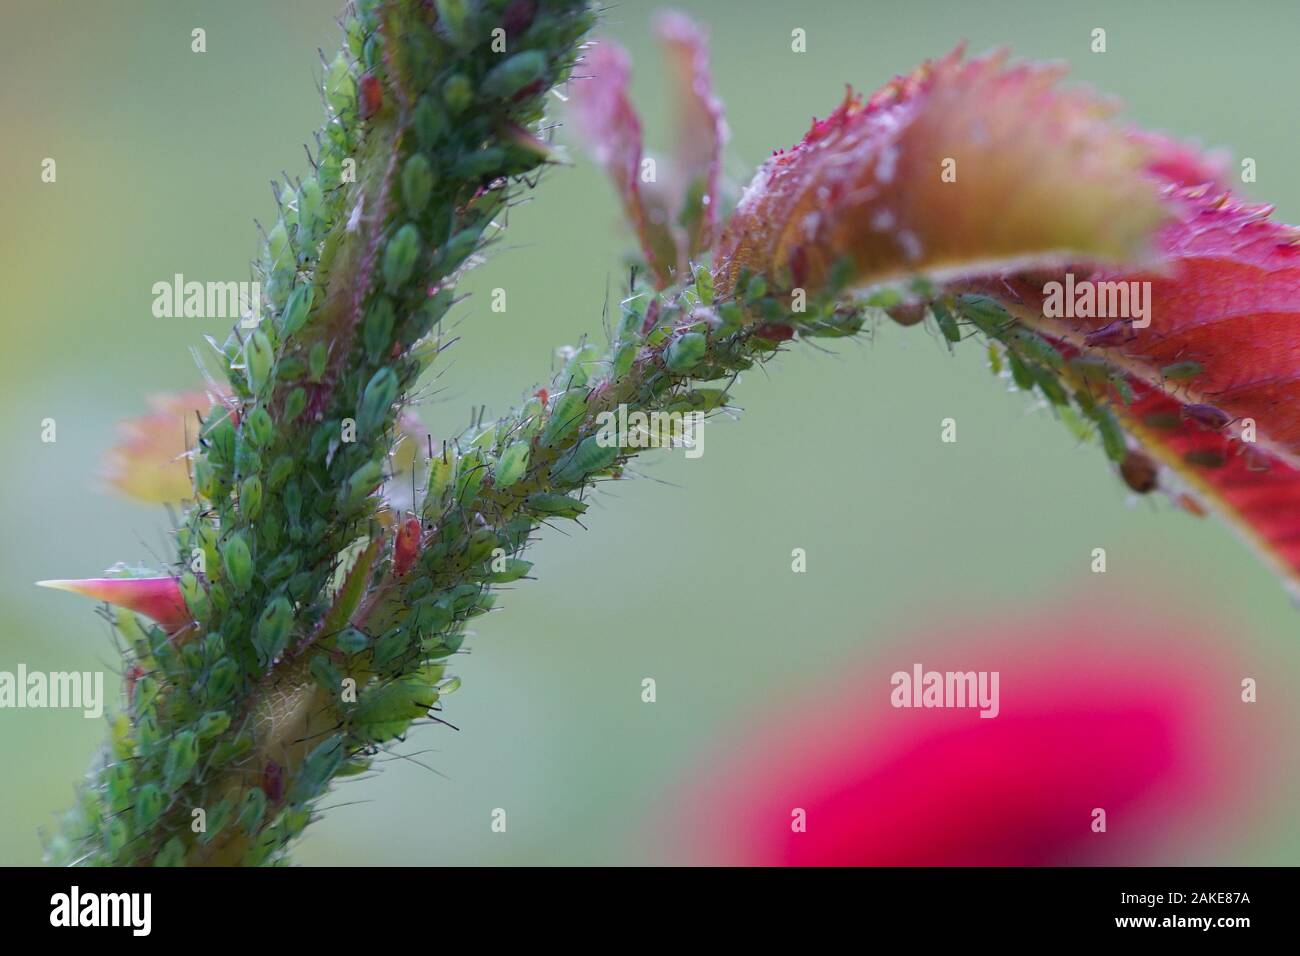 Extreme magnification - Green aphids on a plant Stock Photo